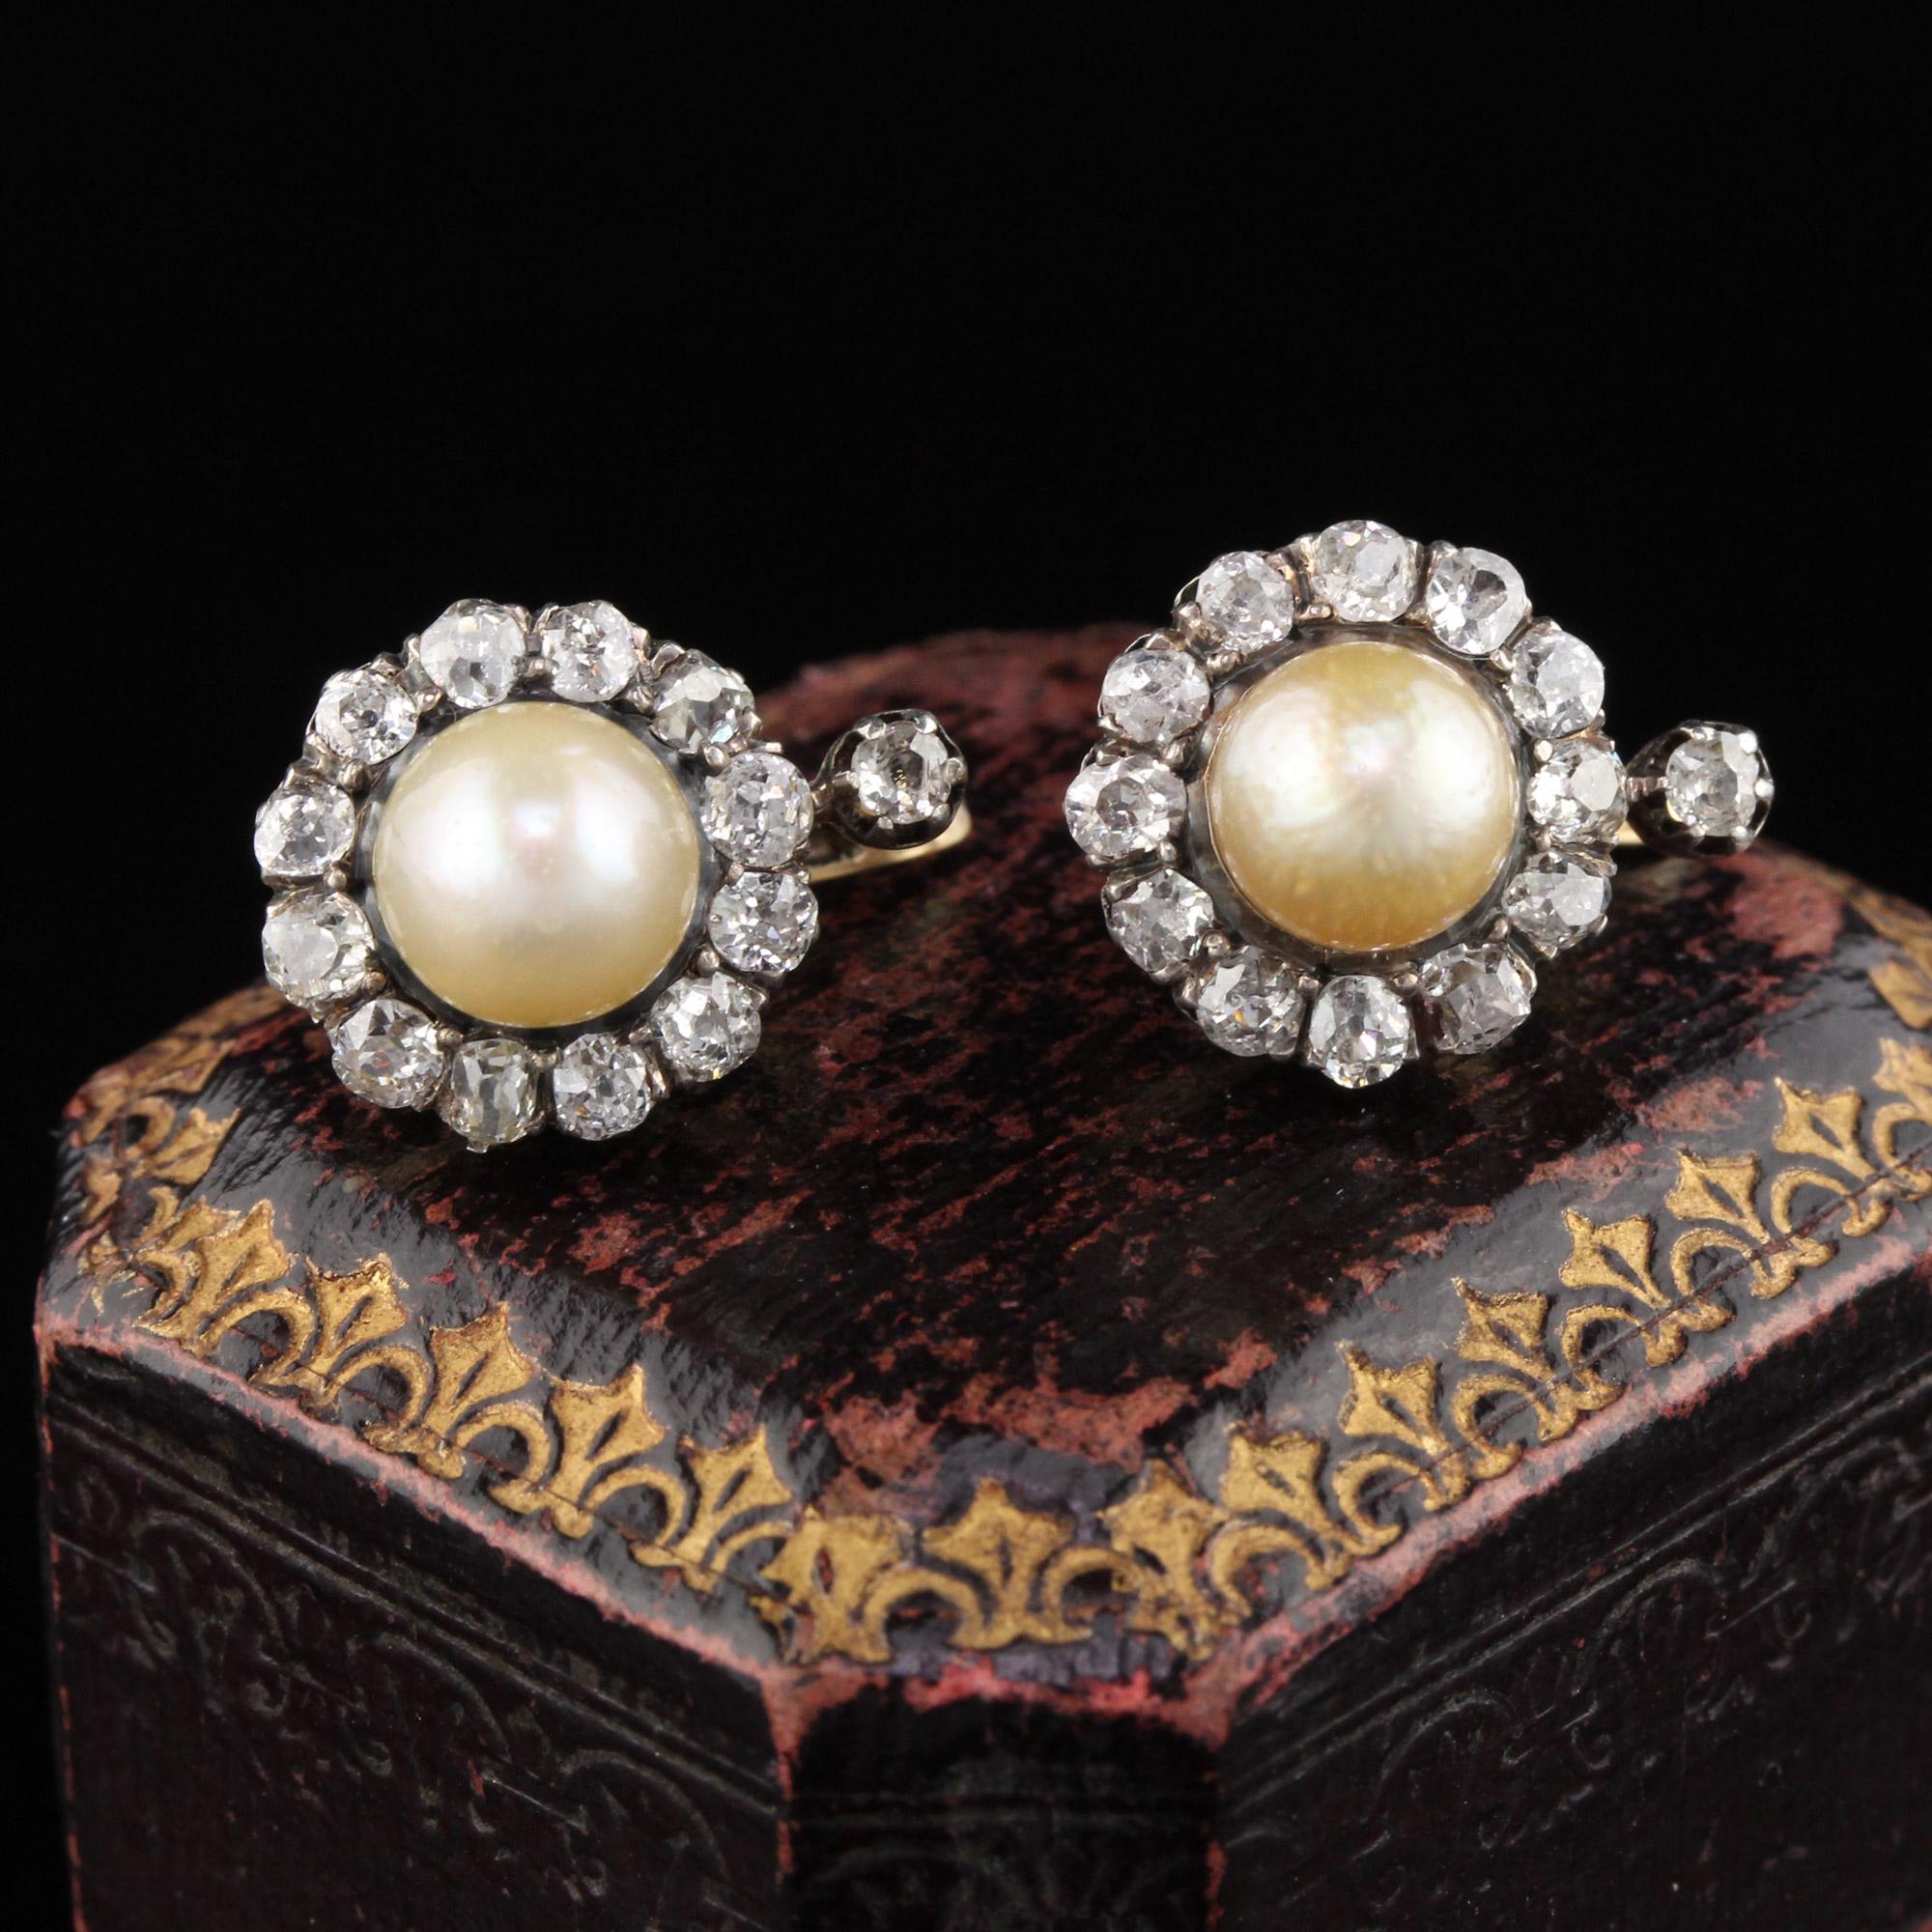 Gorgeous, classic Victorian French natural pearl & diamond cluster earrings that sit perfectly on the ear.

#E0003

Metal: Yellow gold & Platinum Top

Origin: French (Hallmarked)

Weight: 4.7 Grams 

Diamonds: Approximately 0.75 cts

Pearls: GIA